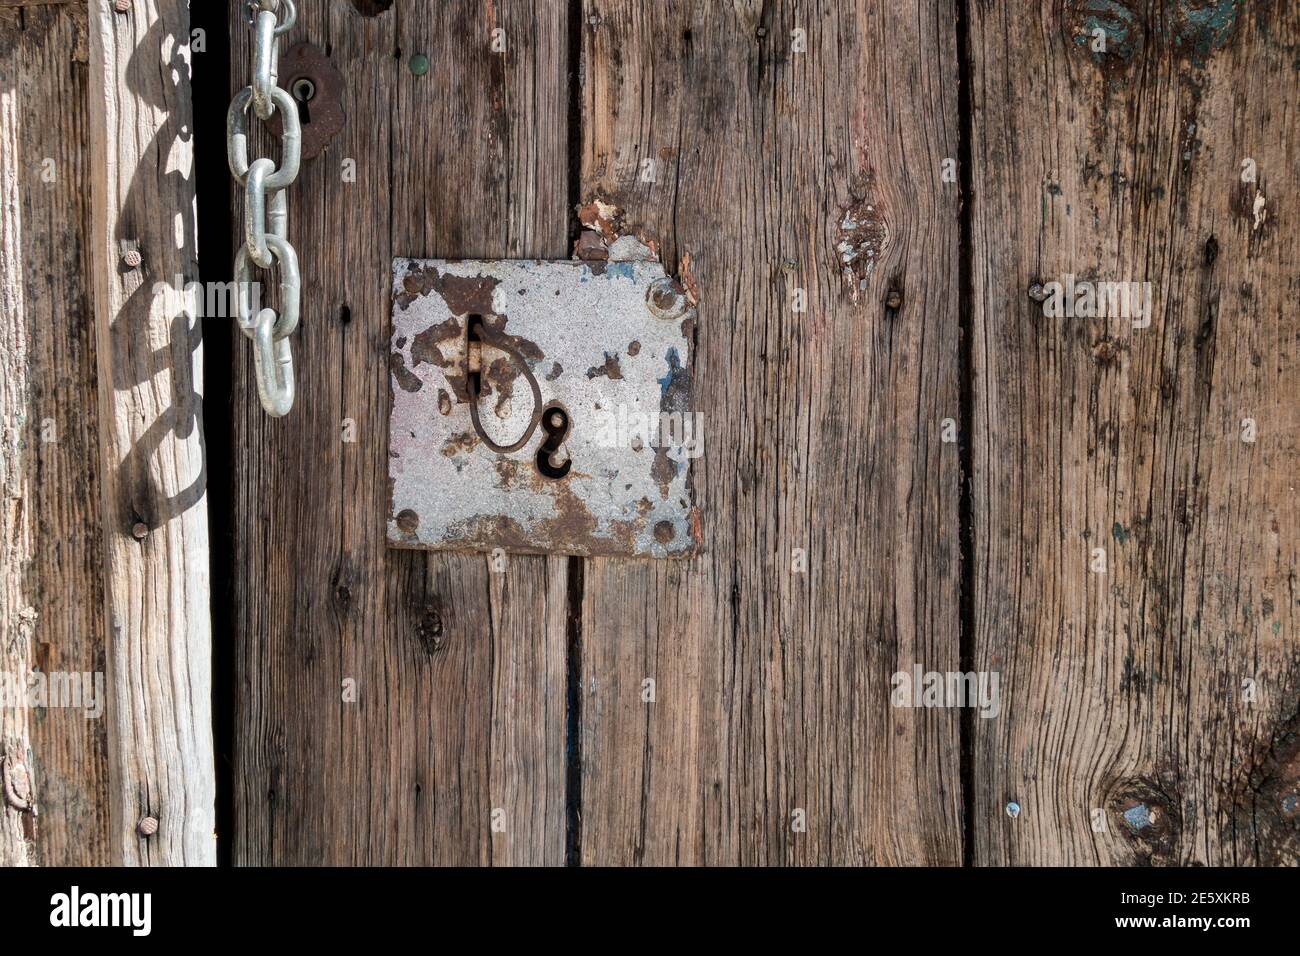 Design detail close-up of natural vintage door panel with keyhole fitting and steel chain hinge Stock Photo